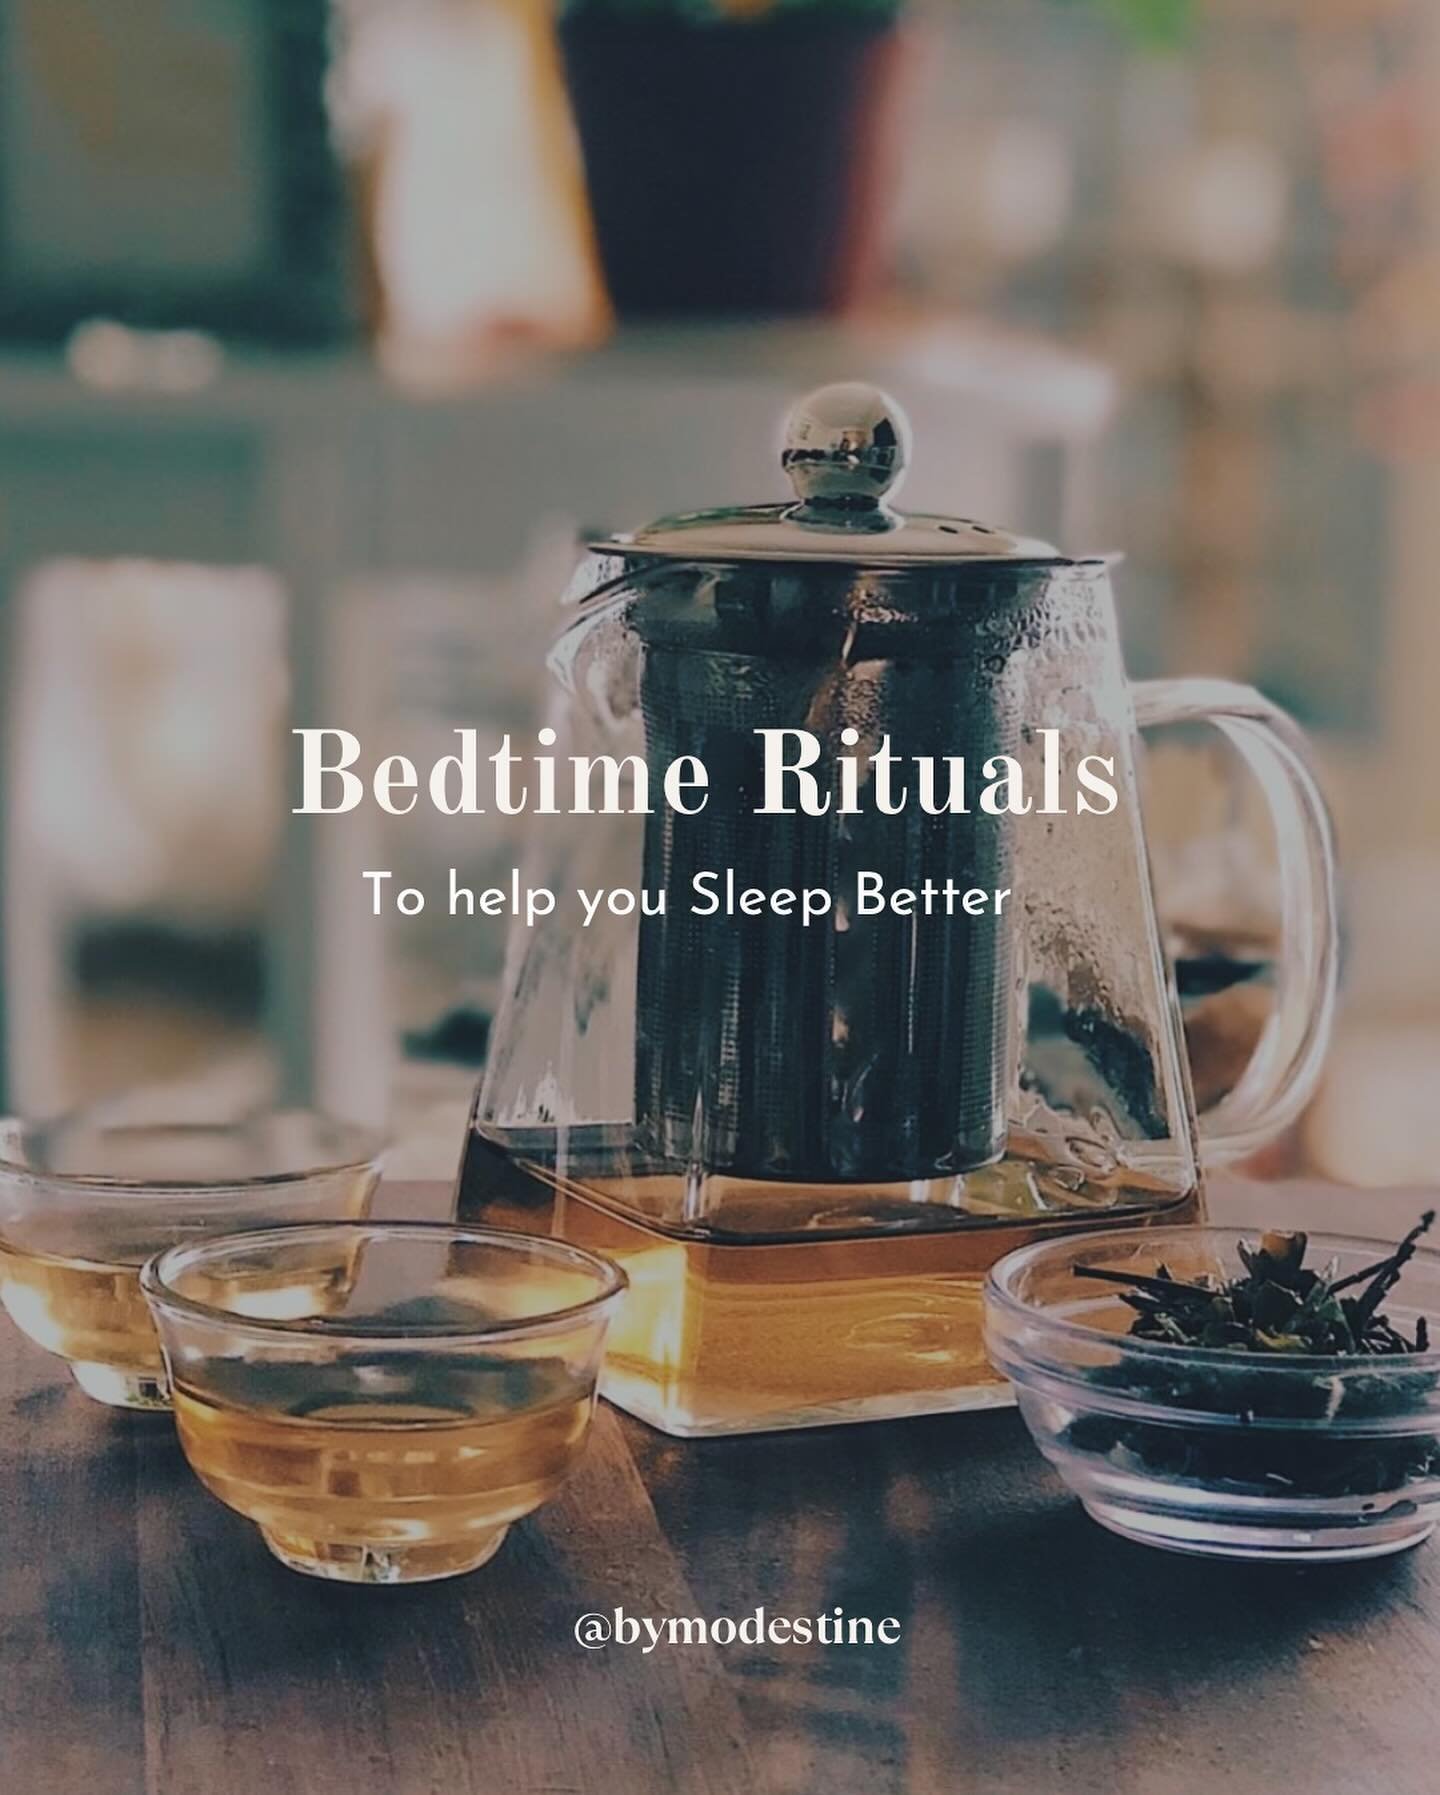 After having a very busy schedule the whole day,&nbsp;you must get a good night&rsquo;s sleep to be productive the following day.&nbsp;
And that is why it is important to have a set of bedtime rituals in place💤. 

Here is why bedtime rituals are cru